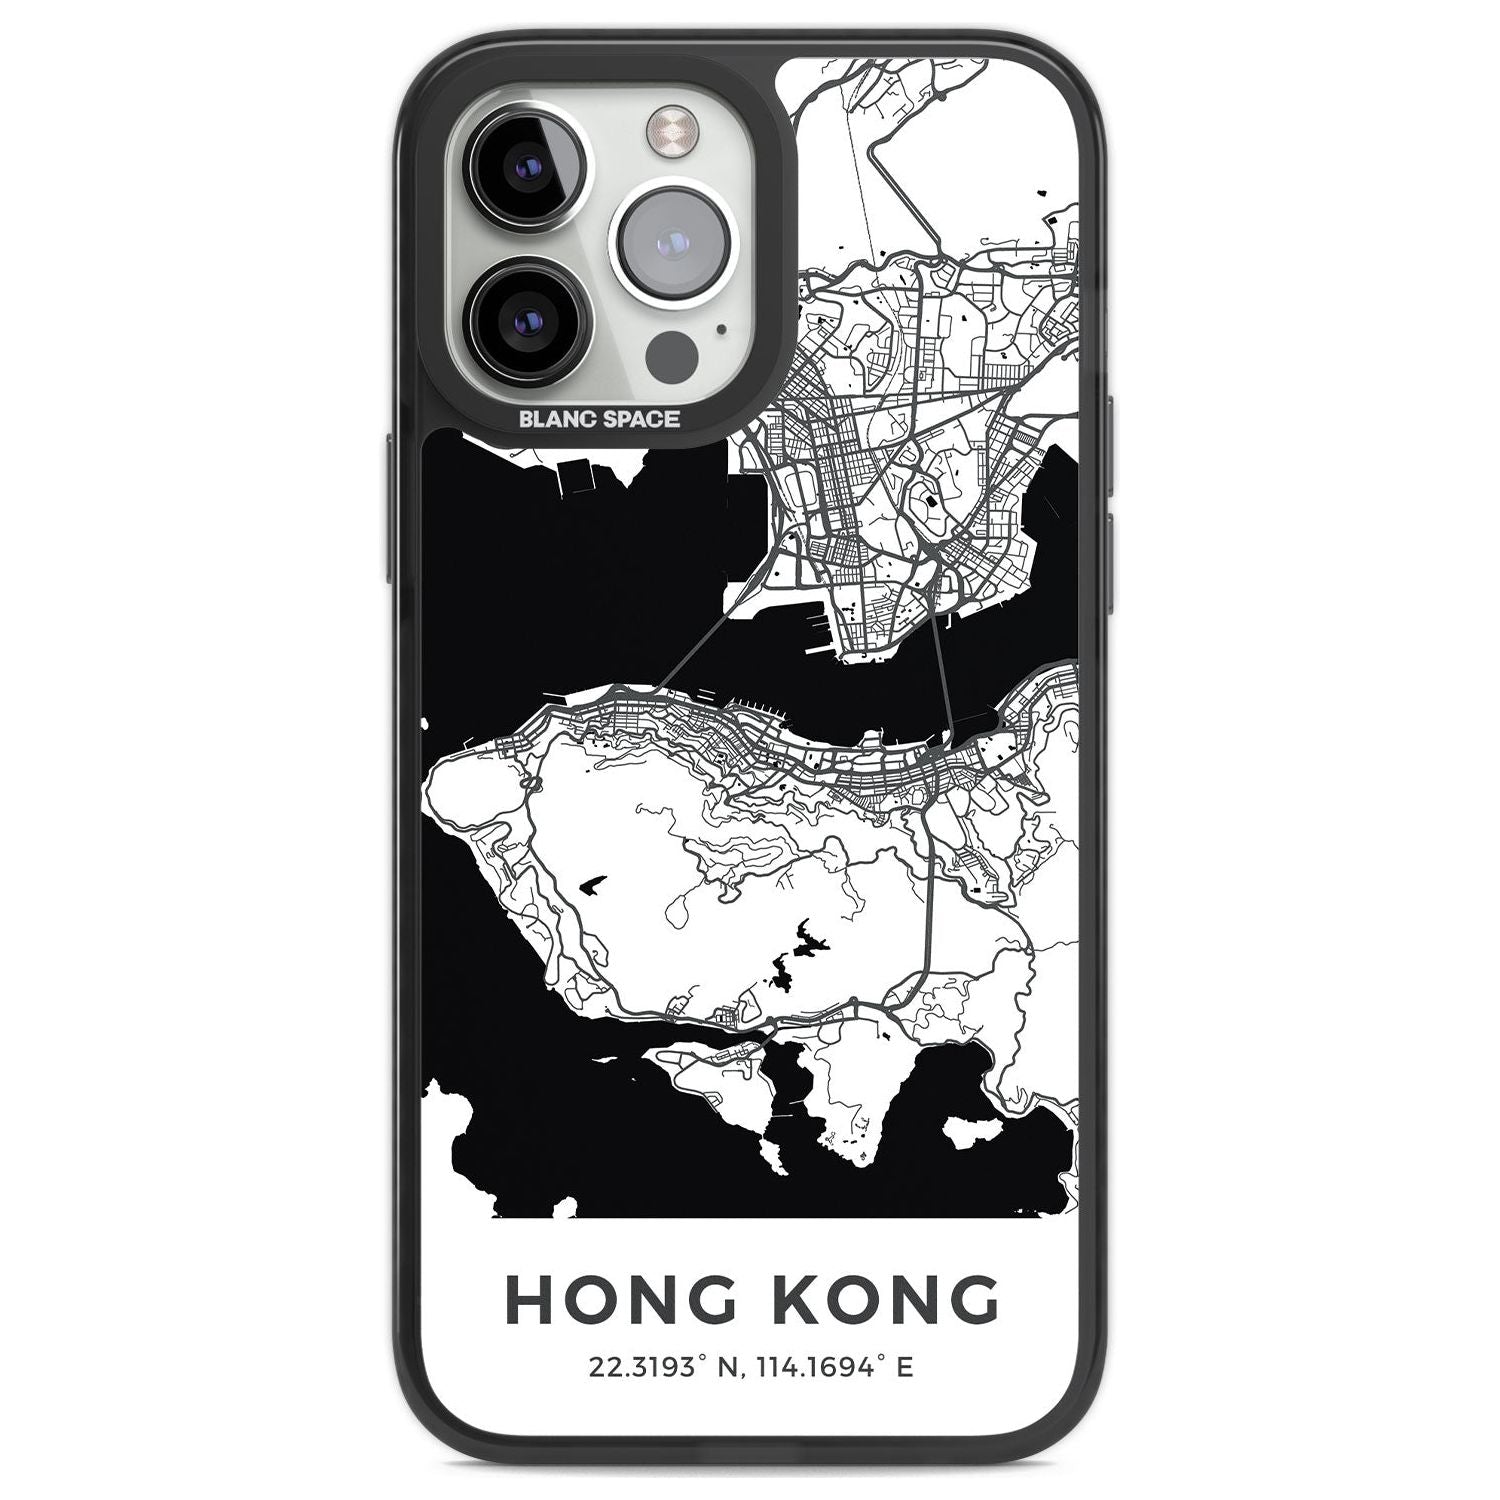 Map of Hong Kong Phone Case iPhone 13 Pro Max / Black Impact Case,iPhone 14 Pro Max / Black Impact Case Blanc Space